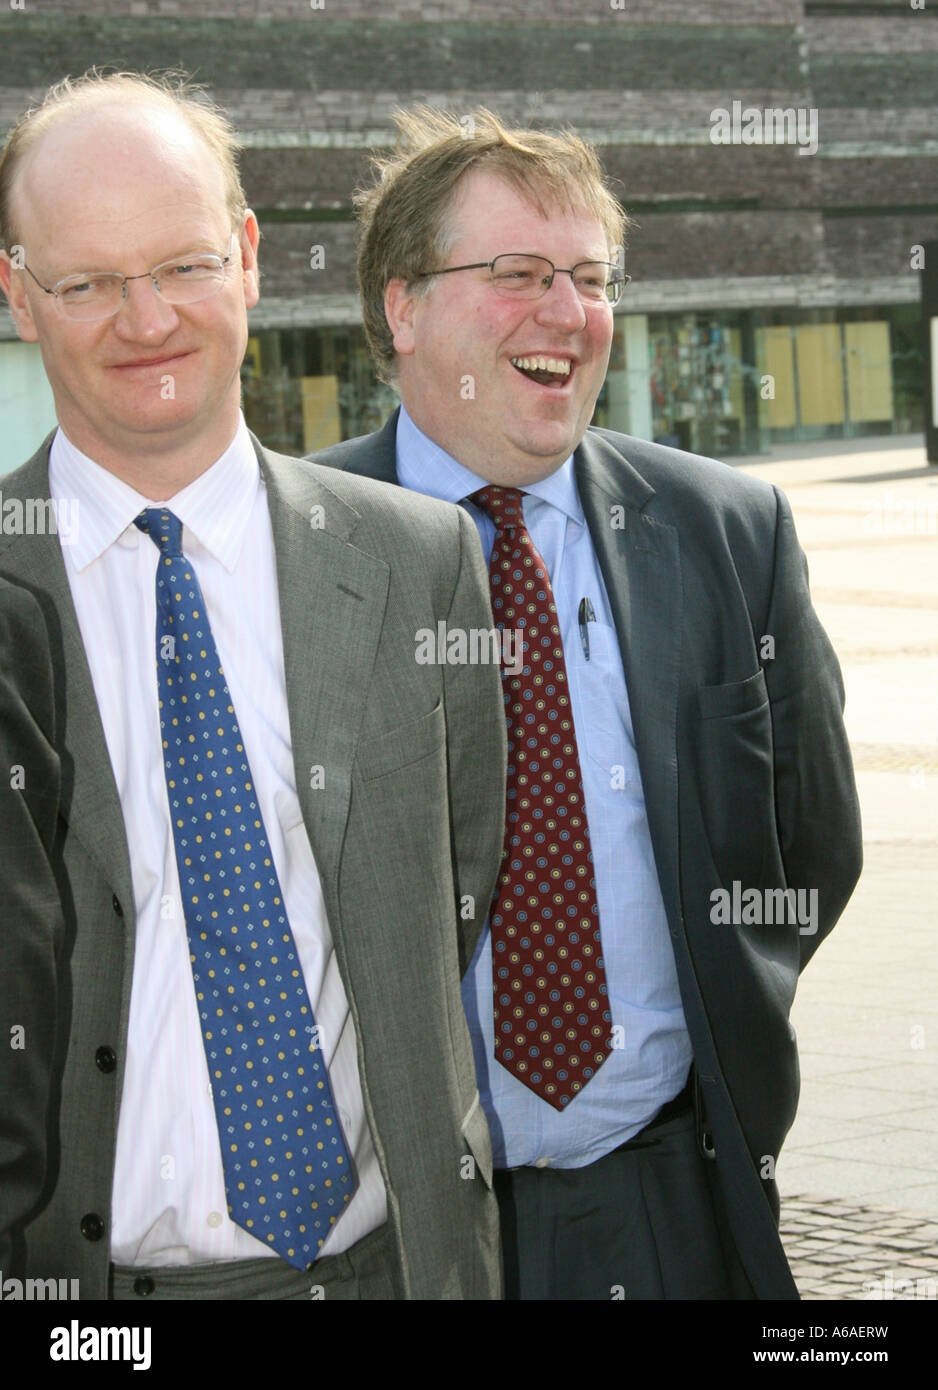 David Willetts MP and Rt Hon Patrick McLoughlin MP in Cardiff South Wales GB UK 2007 Stock Photo